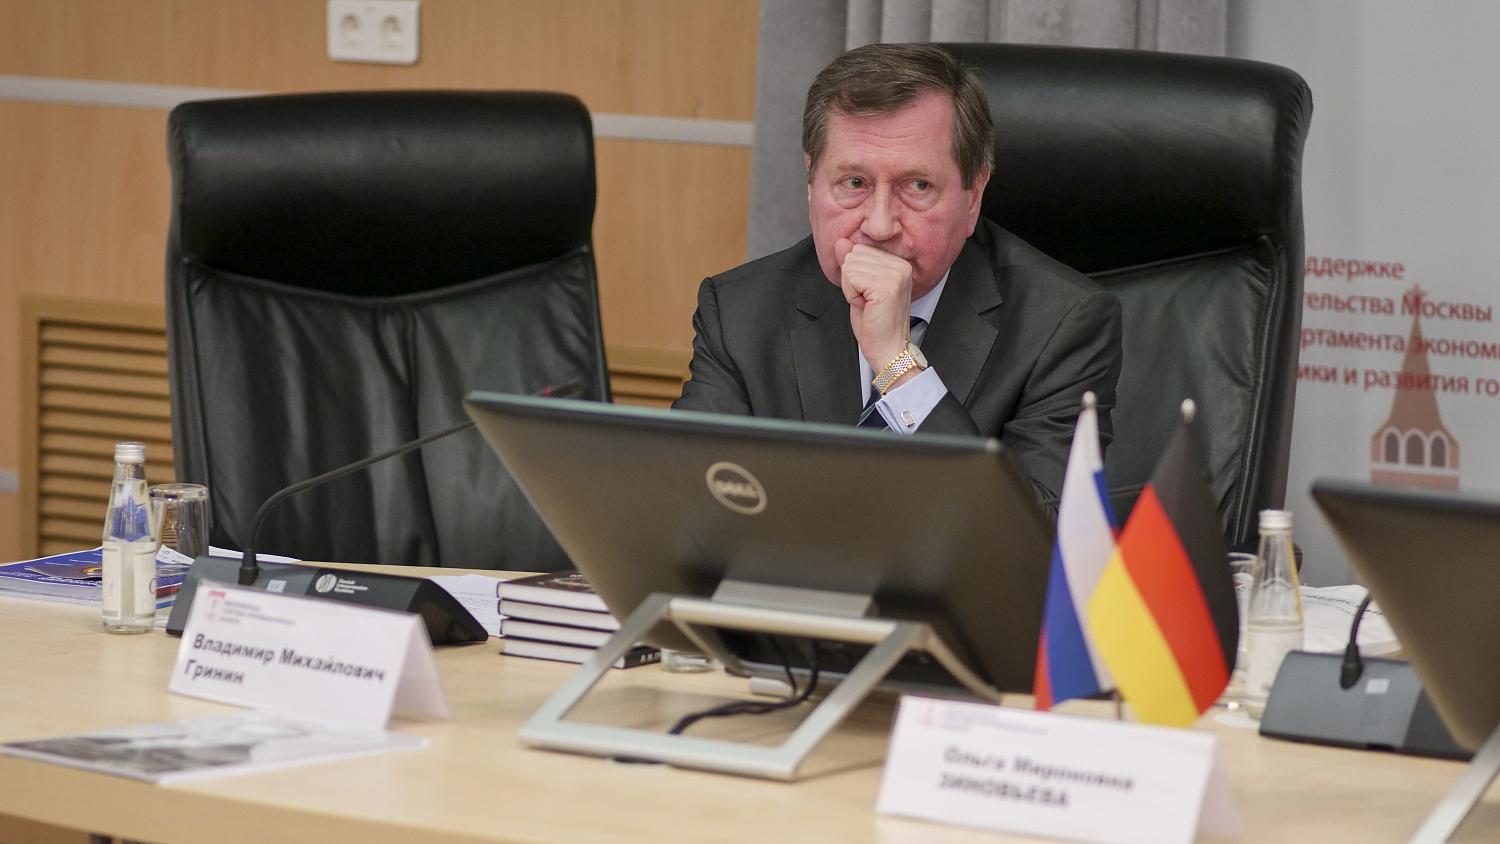 The Russia-Germany Society has summed up some of its work over the past four years